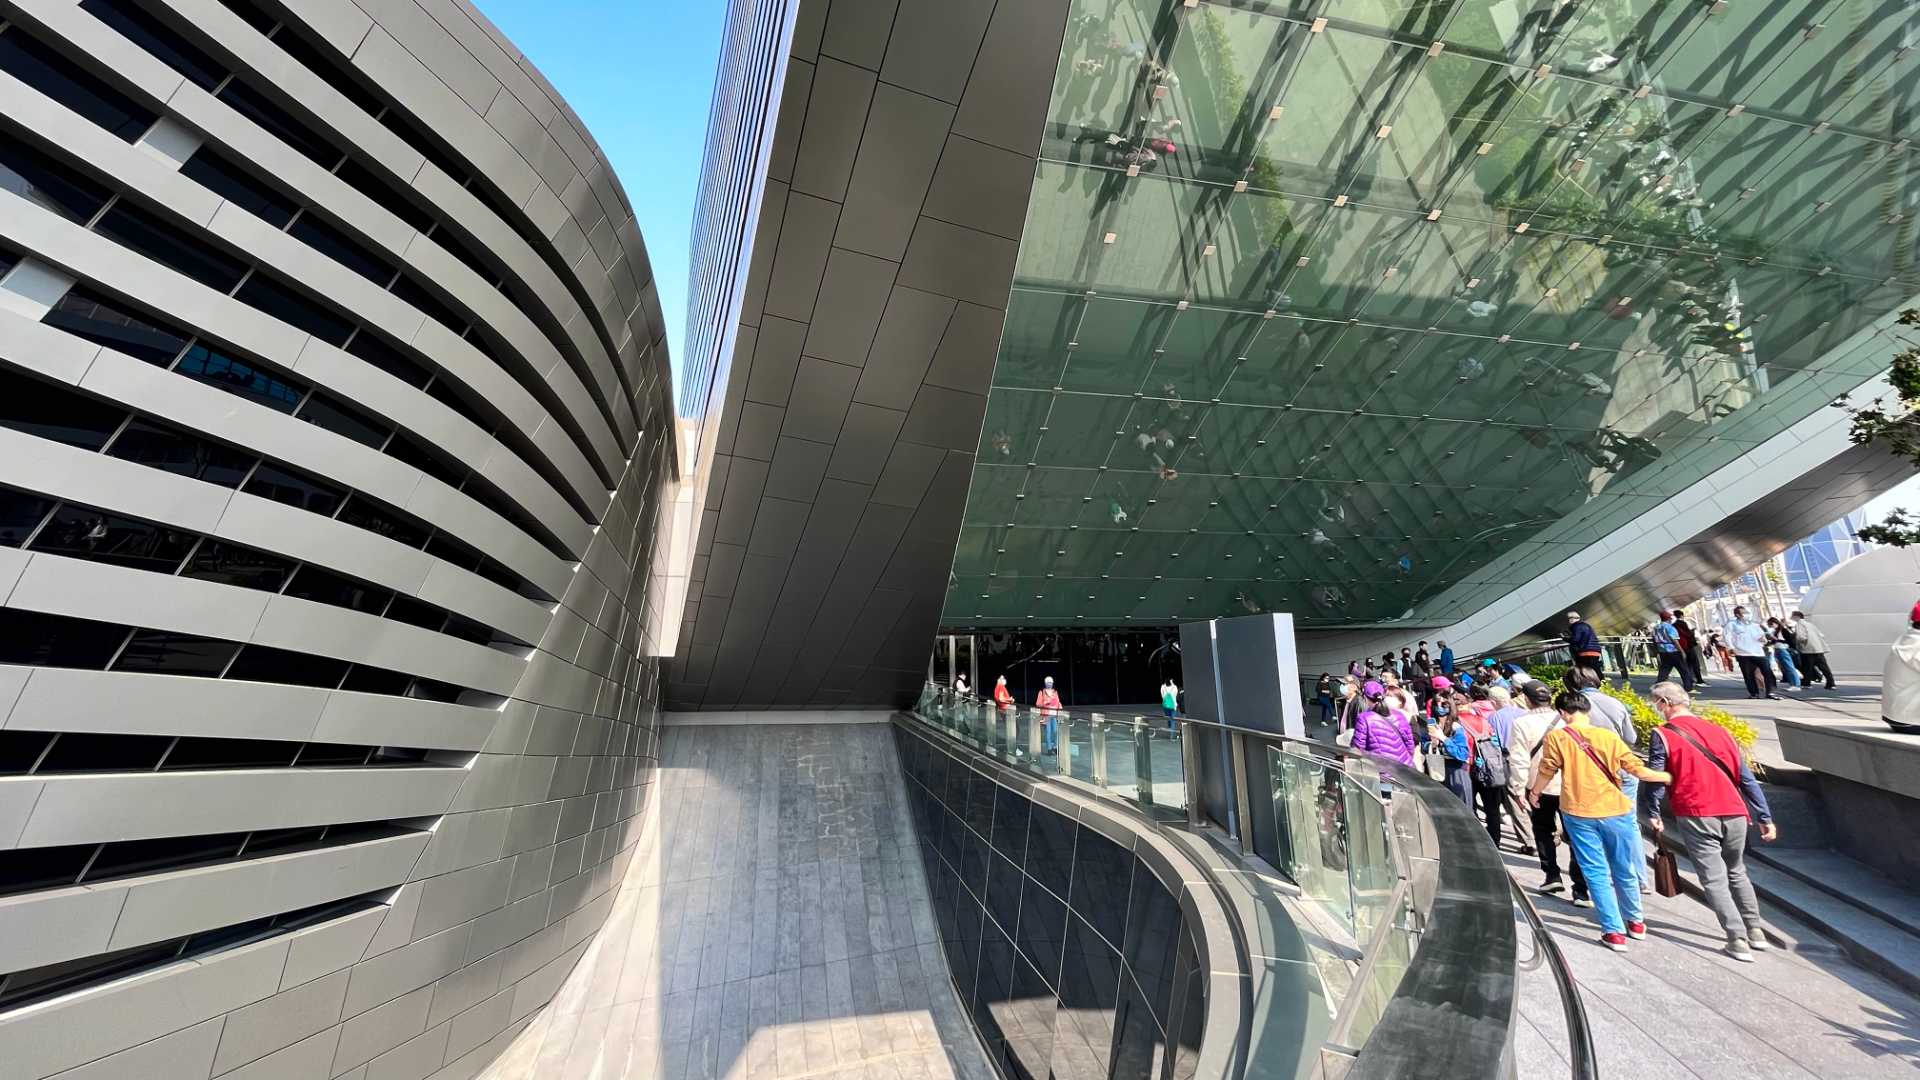 View of the viewing deck entrance, showing a reflective glass ceiling projecting out over the deck. It’s a sunny day. Dozens of people are in the foreground.